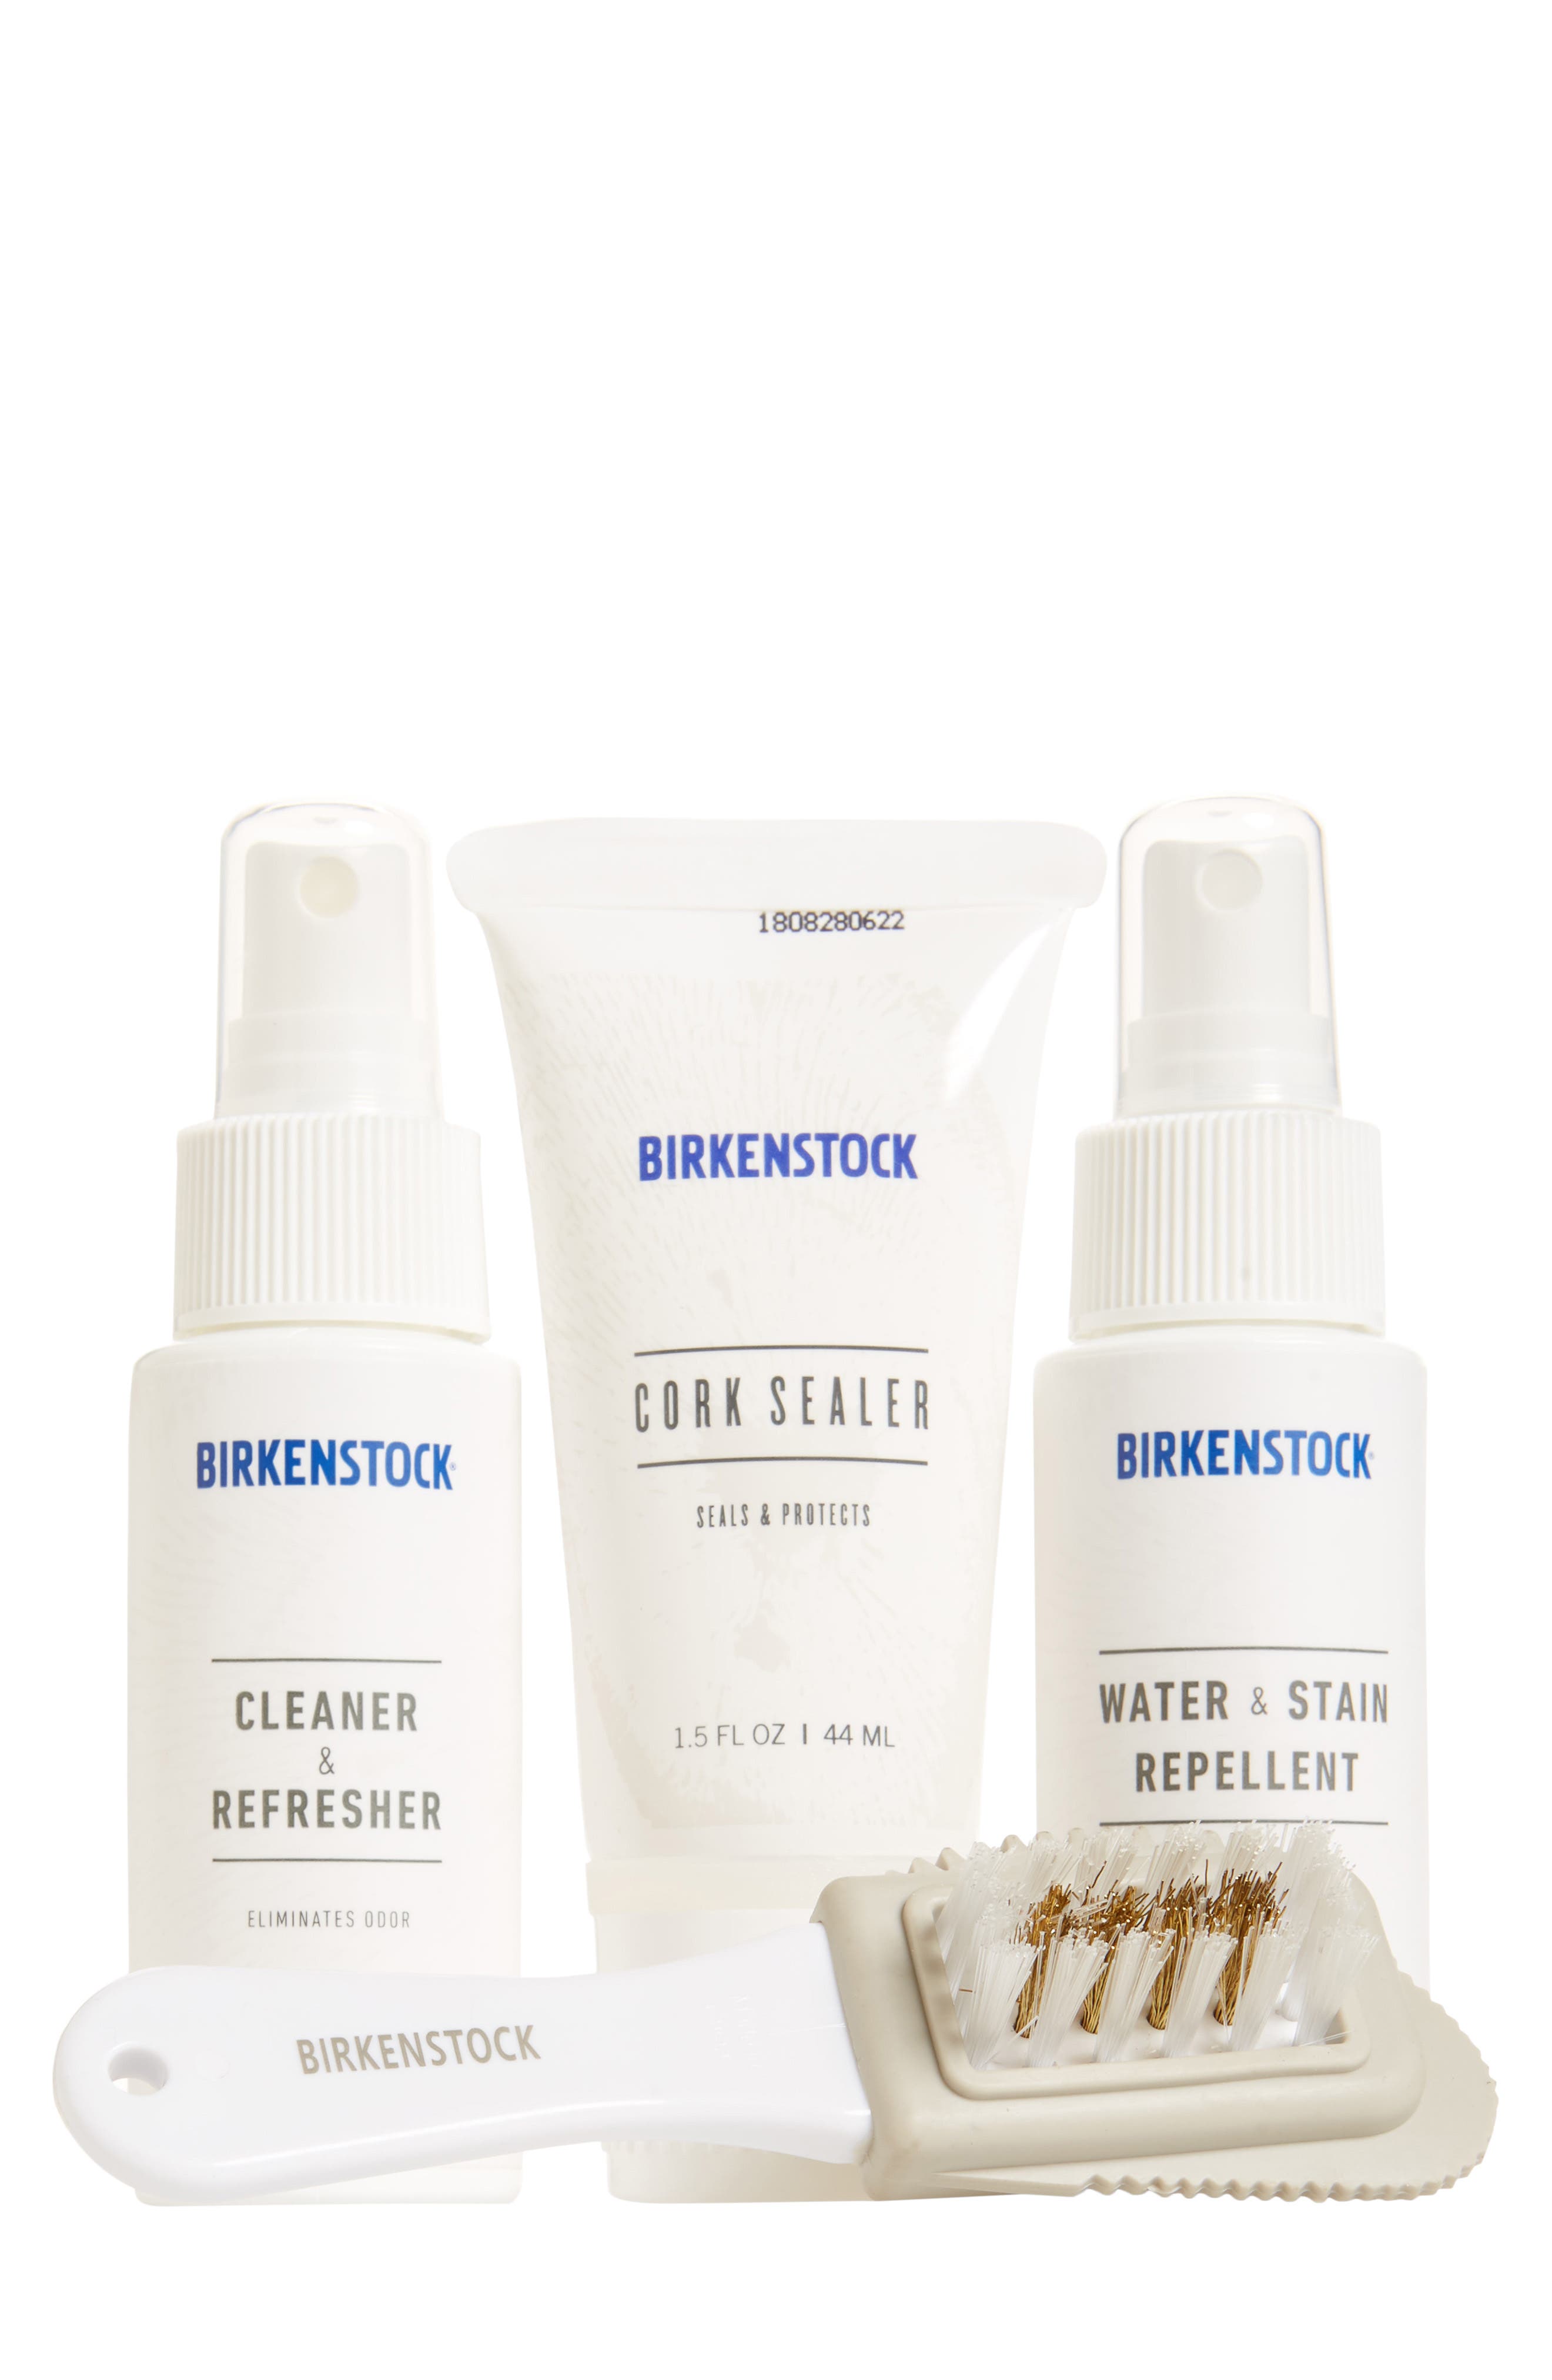 how to use birkenstock care kit